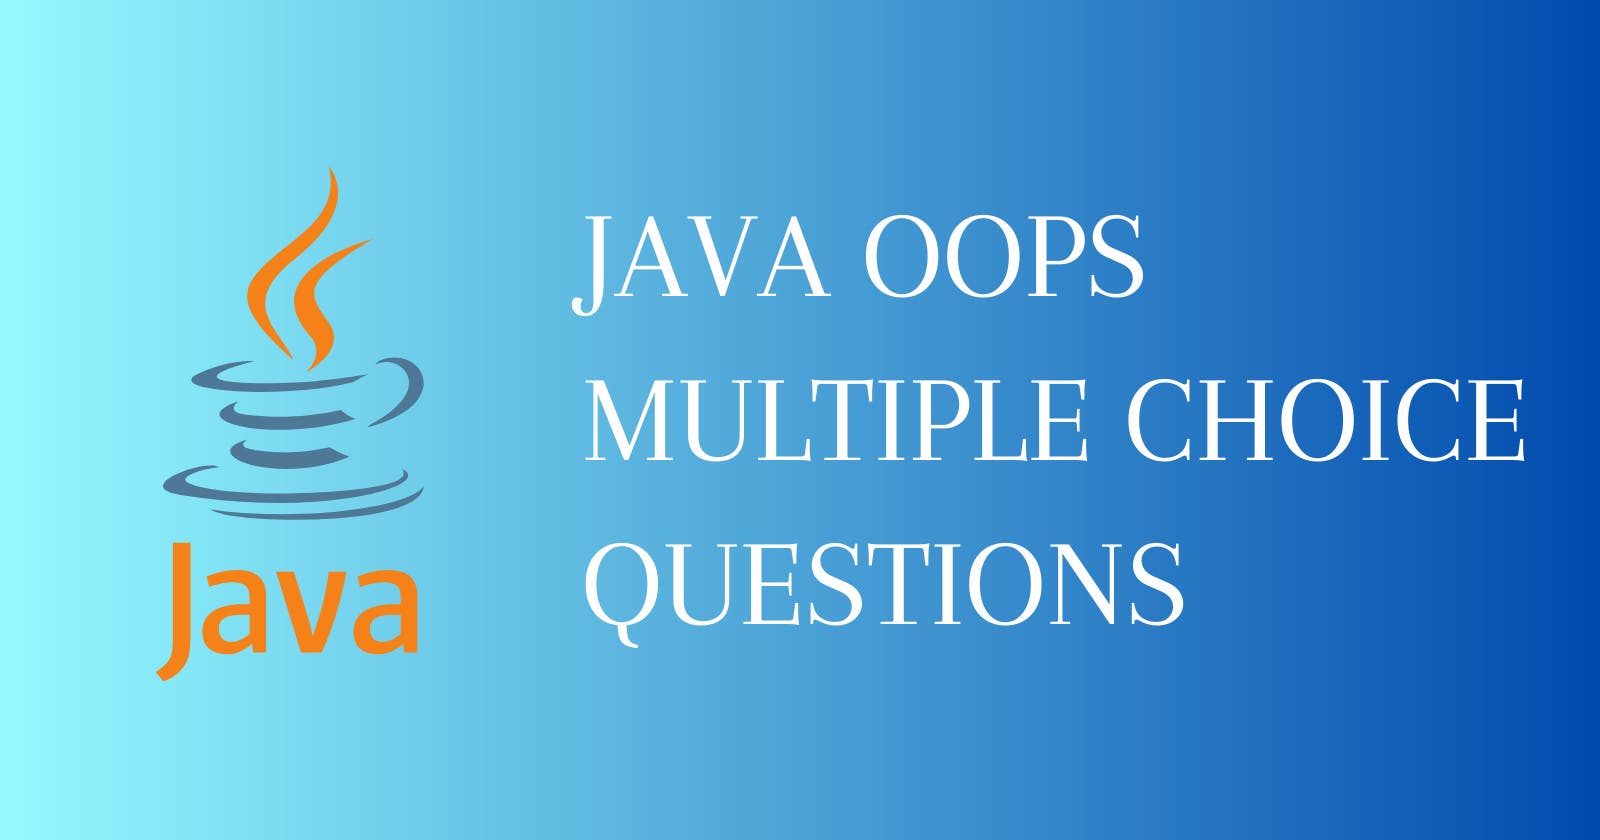 Java OOPS Multiple Choice Questions